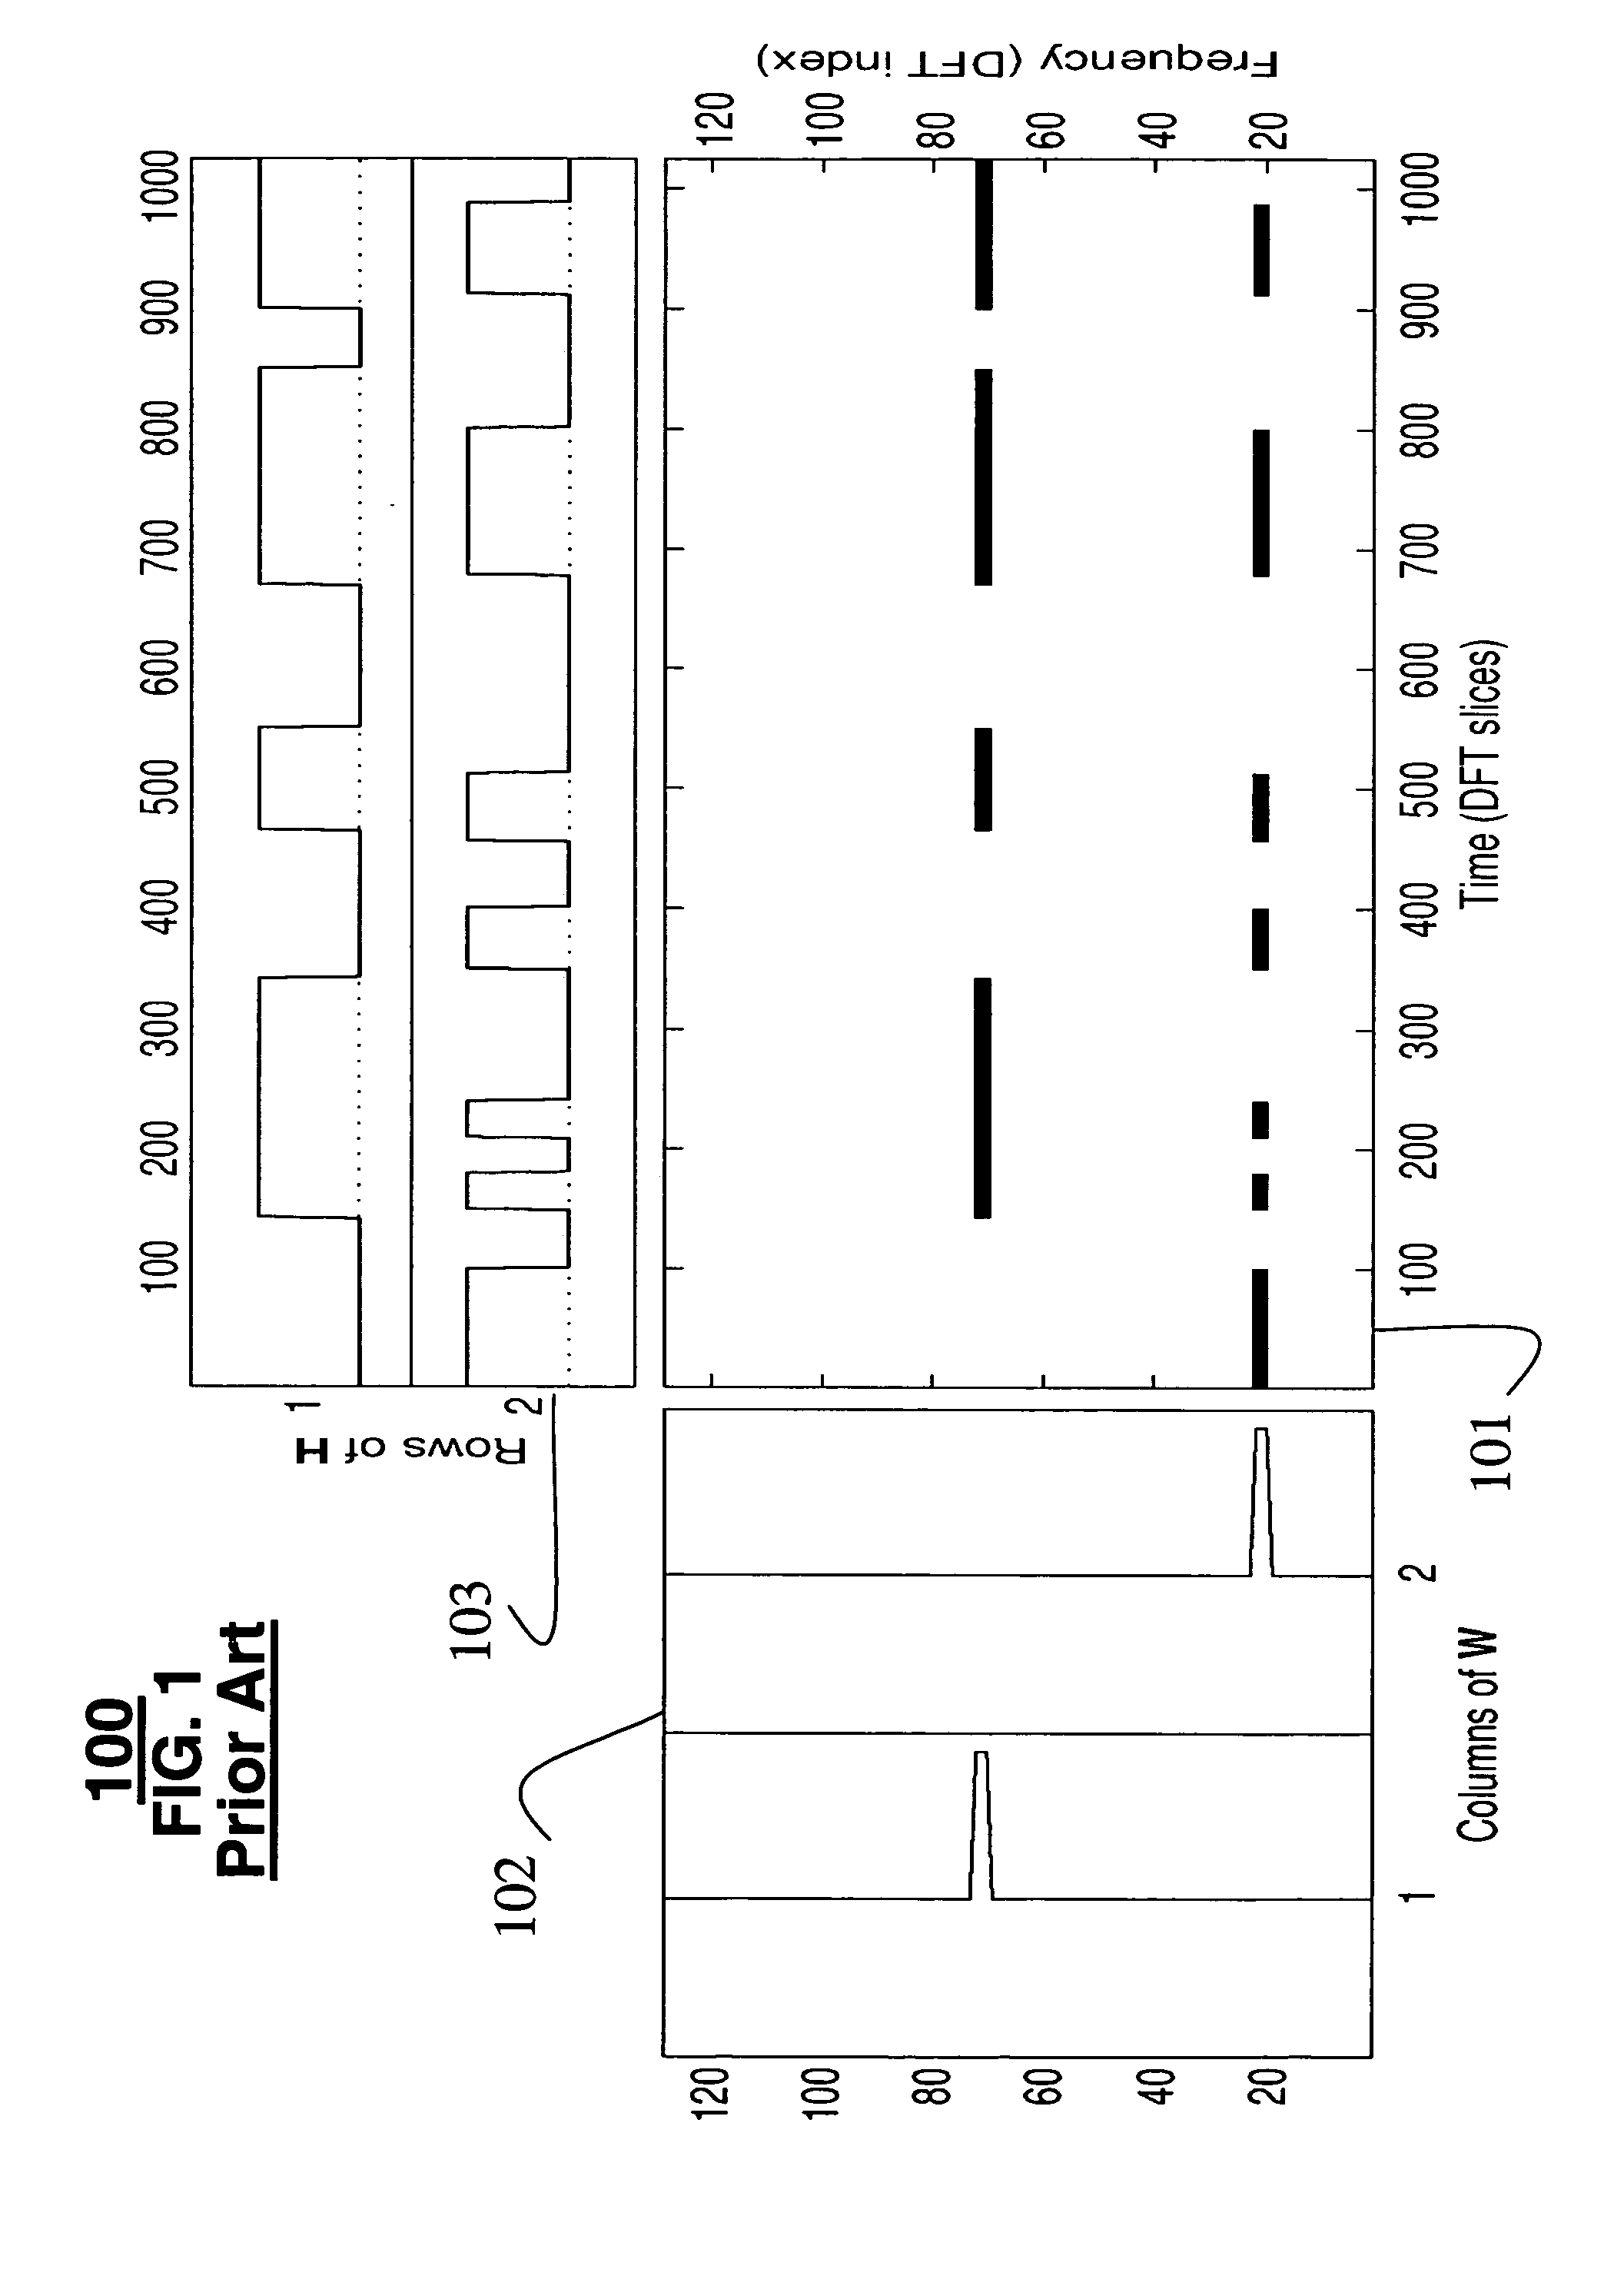 Method and system for separating multiple sound sources from monophonic input with non-negative matrix factor deconvolution